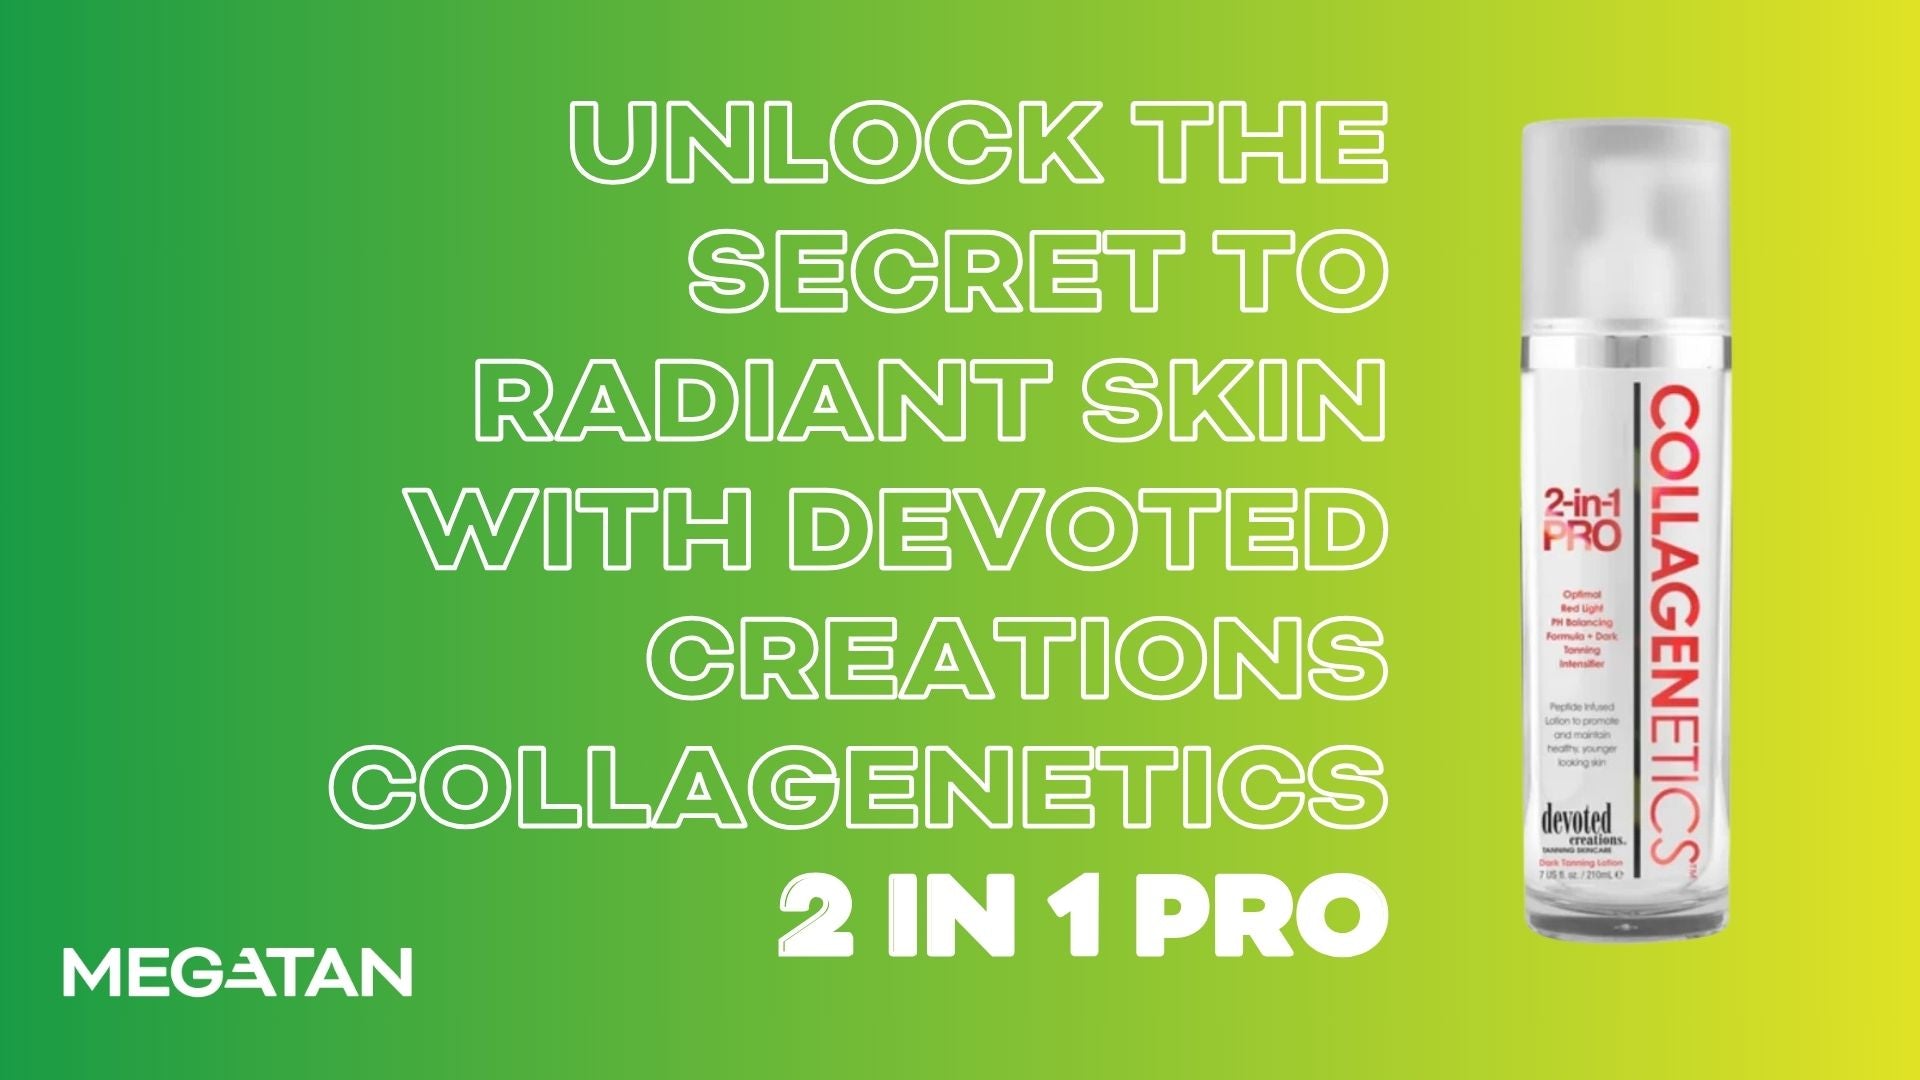 Unlock the Secret to Radiant Skin with Devoted Creations Collagenetics 2 in 1 Pro